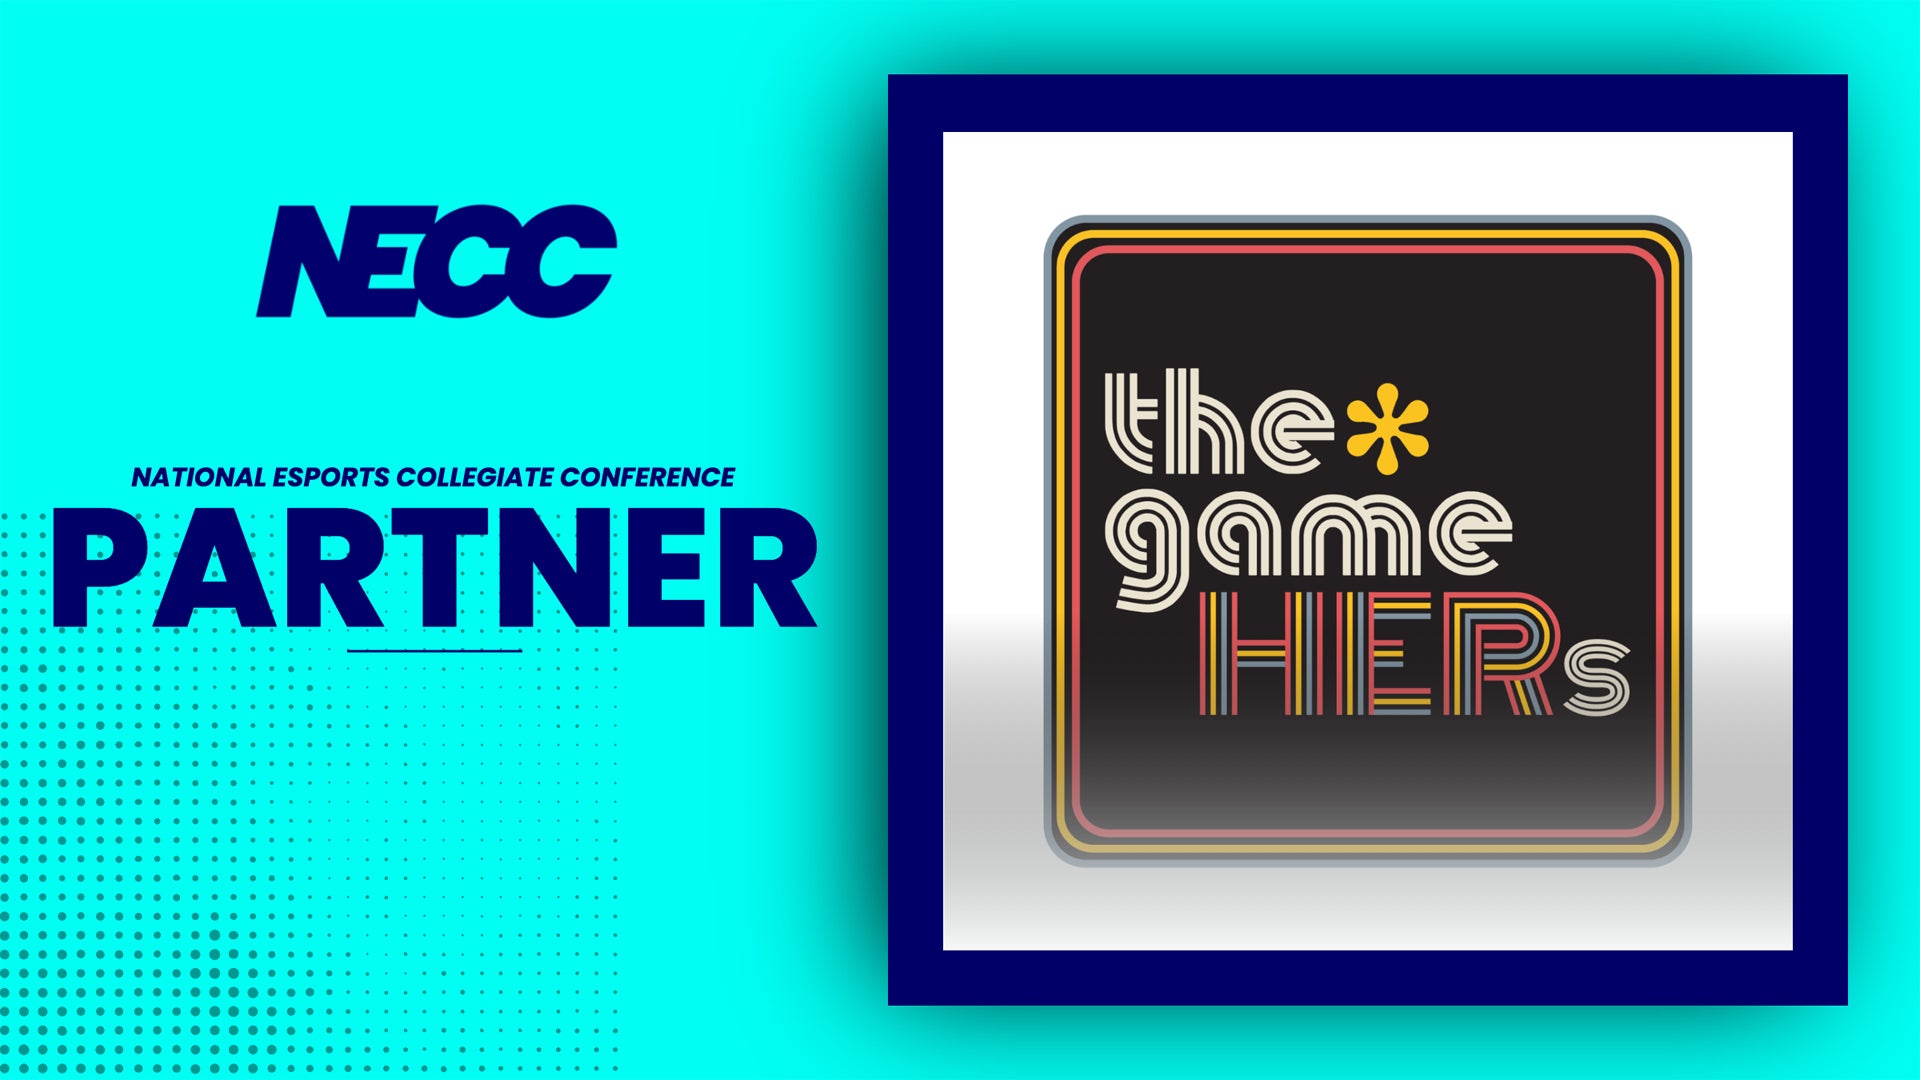 NECC Announces Working Partnership with the *gameHERS to Support and Provide Opportunities for Women, Femme-Identifying and Non-Binary Gamers